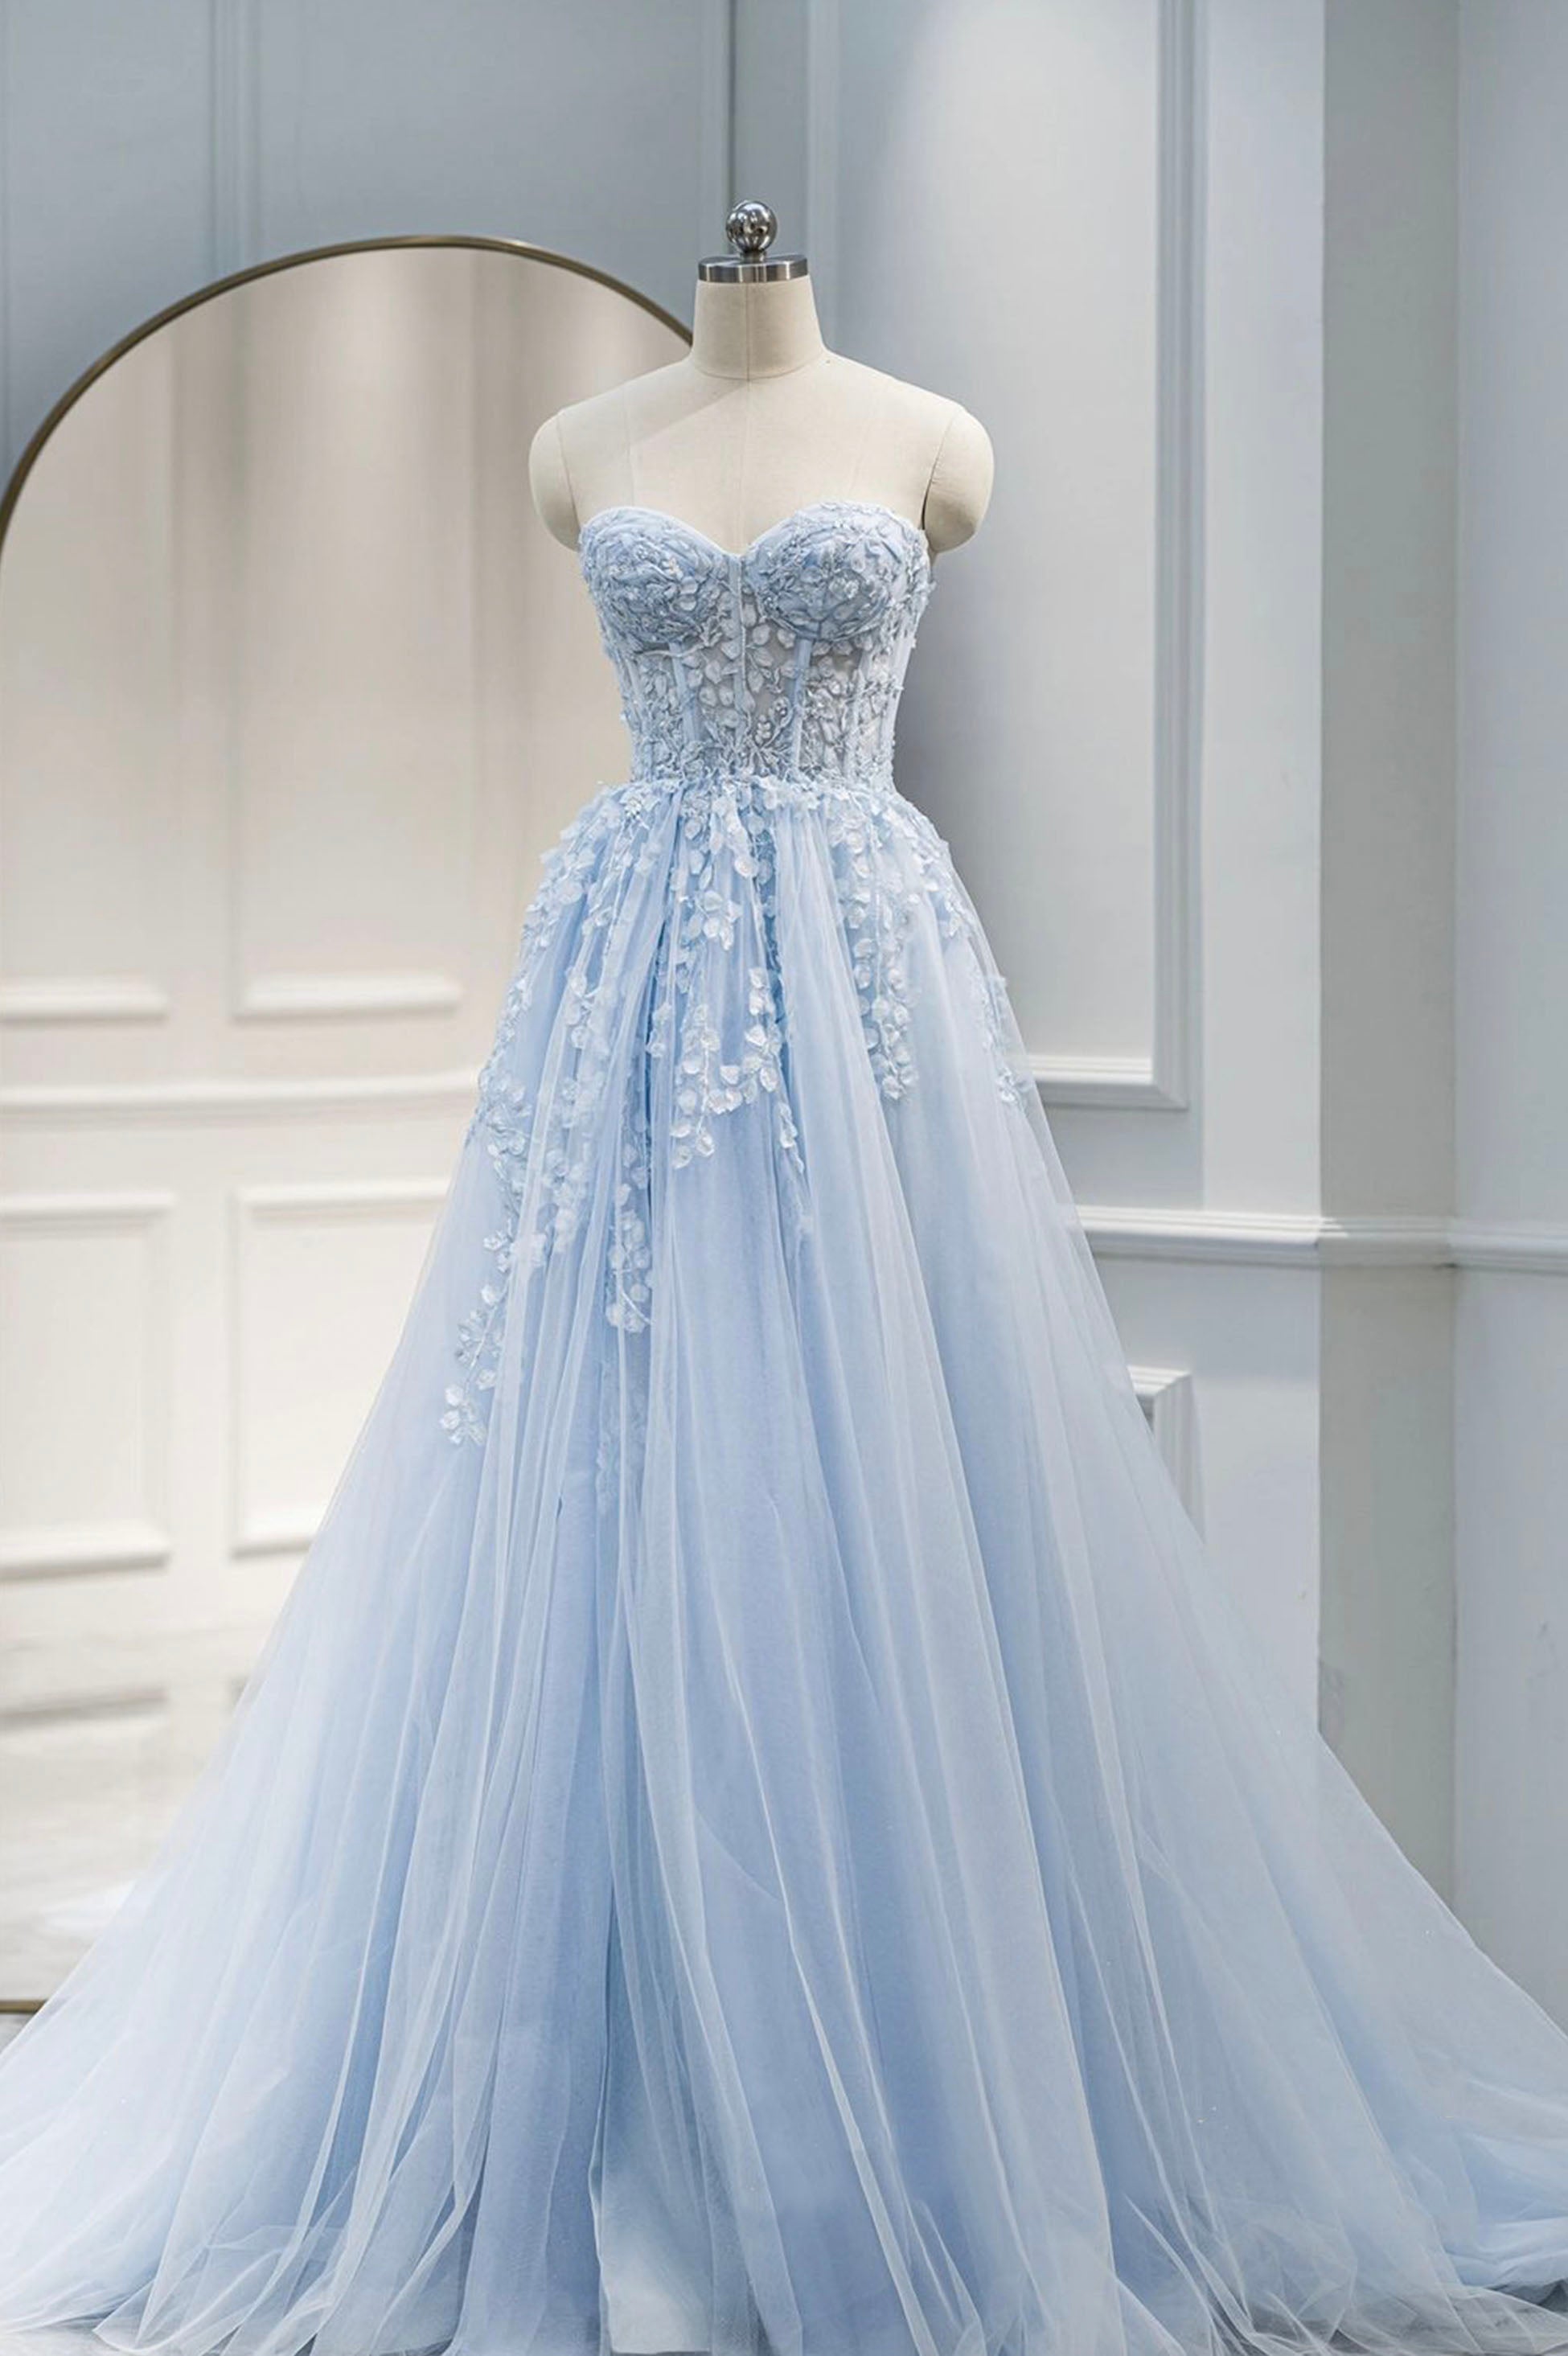 Blue Sweetheart Neck Lace Floor Length Corset Prom Dress, Lovely Blue Evening Dress outfit, Party Dresses Prom